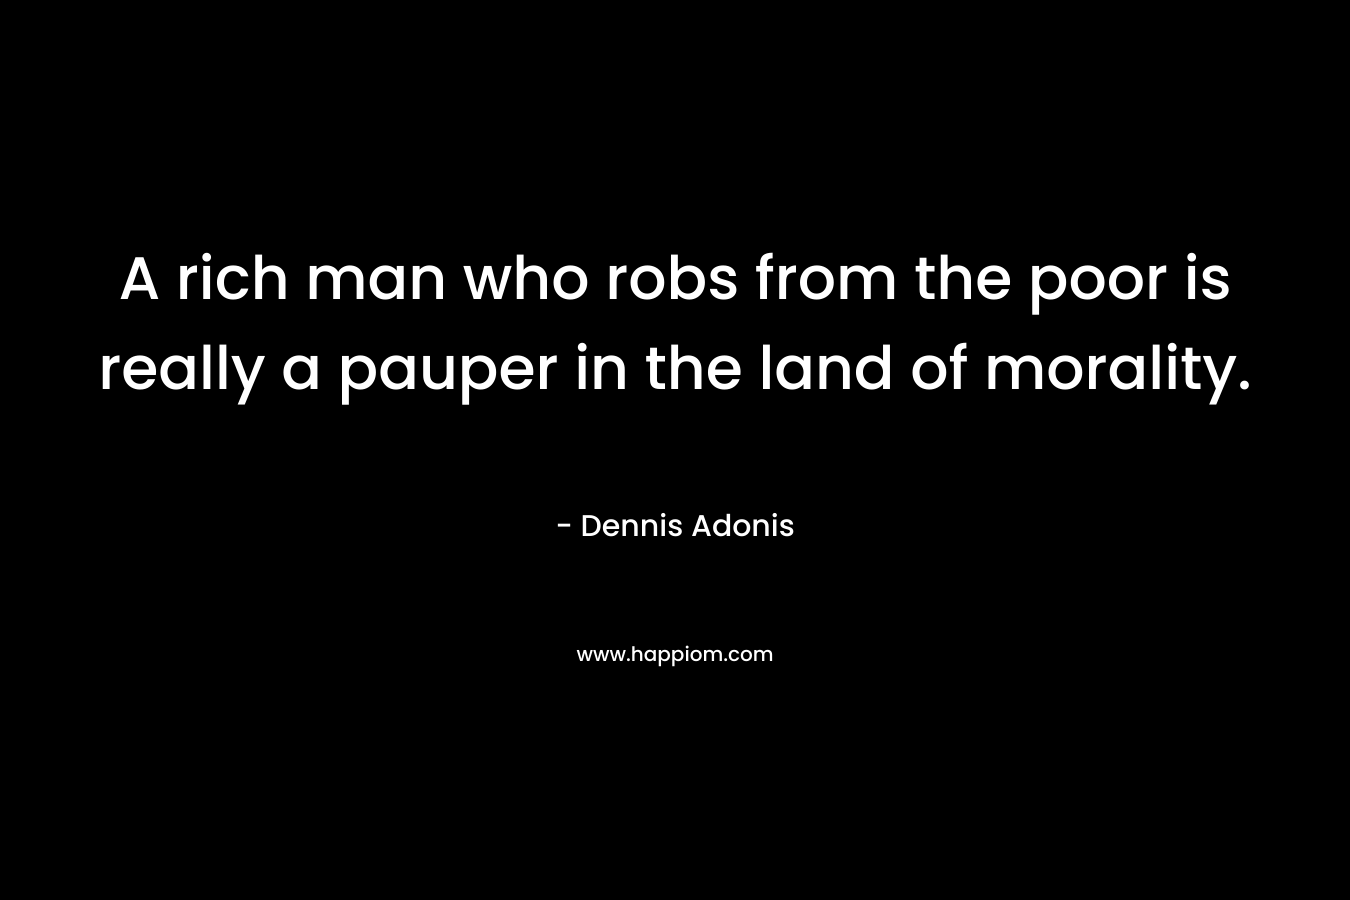 A rich man who robs from the poor is really a pauper in the land of morality.